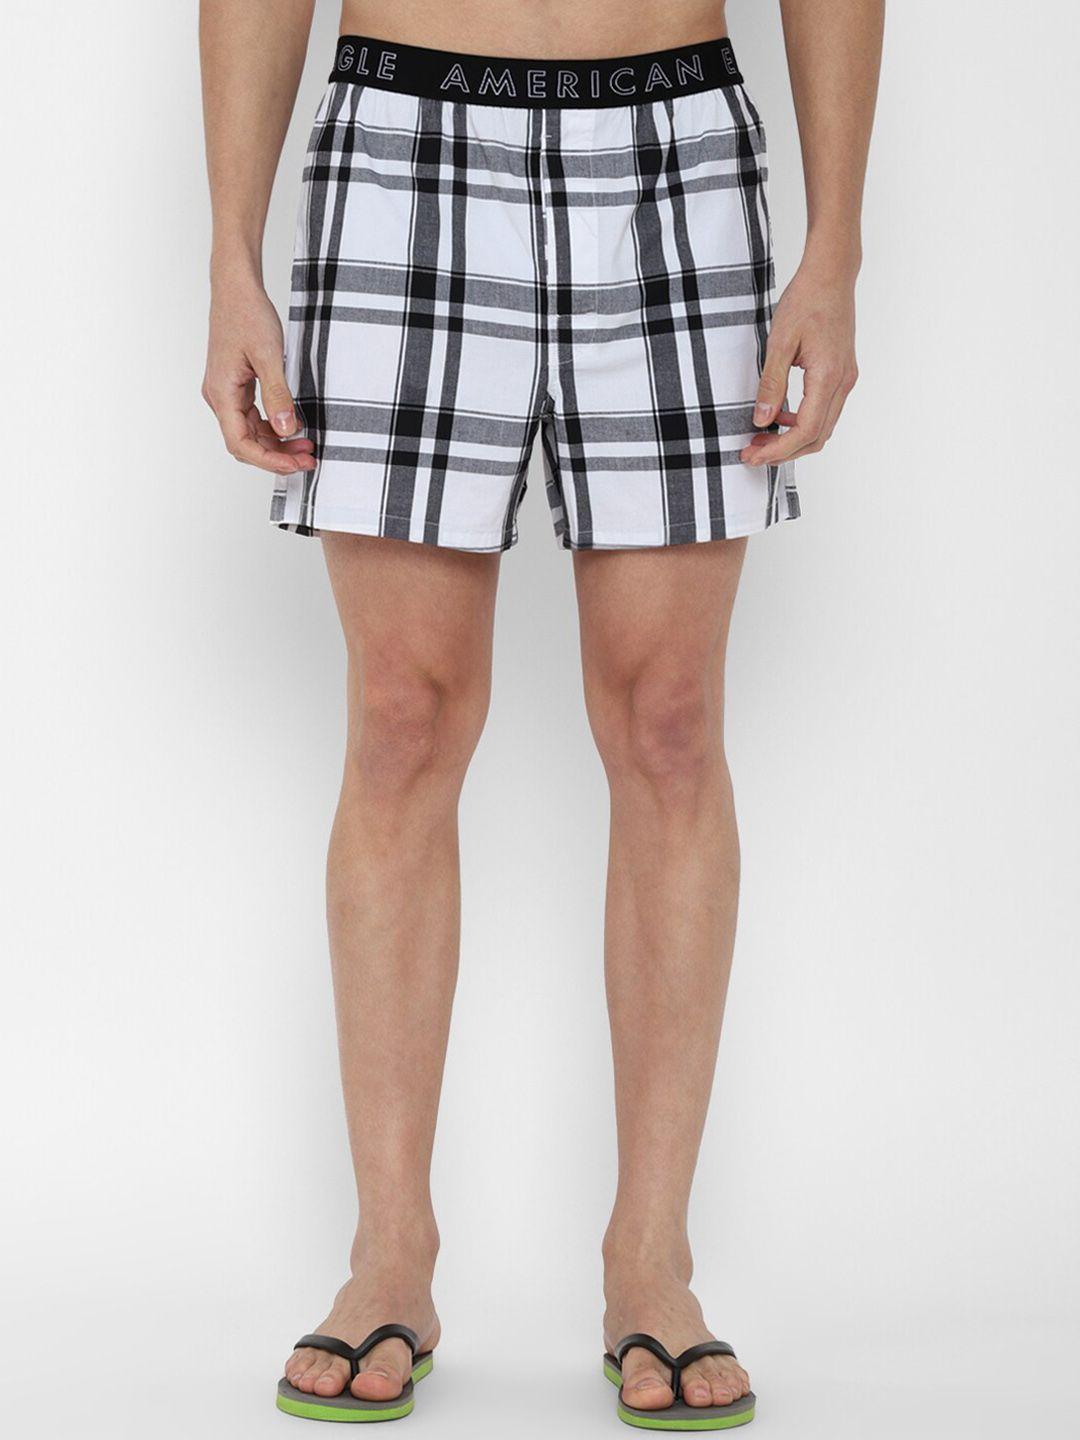 AMERICAN EAGLE OUTFITTERS Men White & Black Checked Boxers